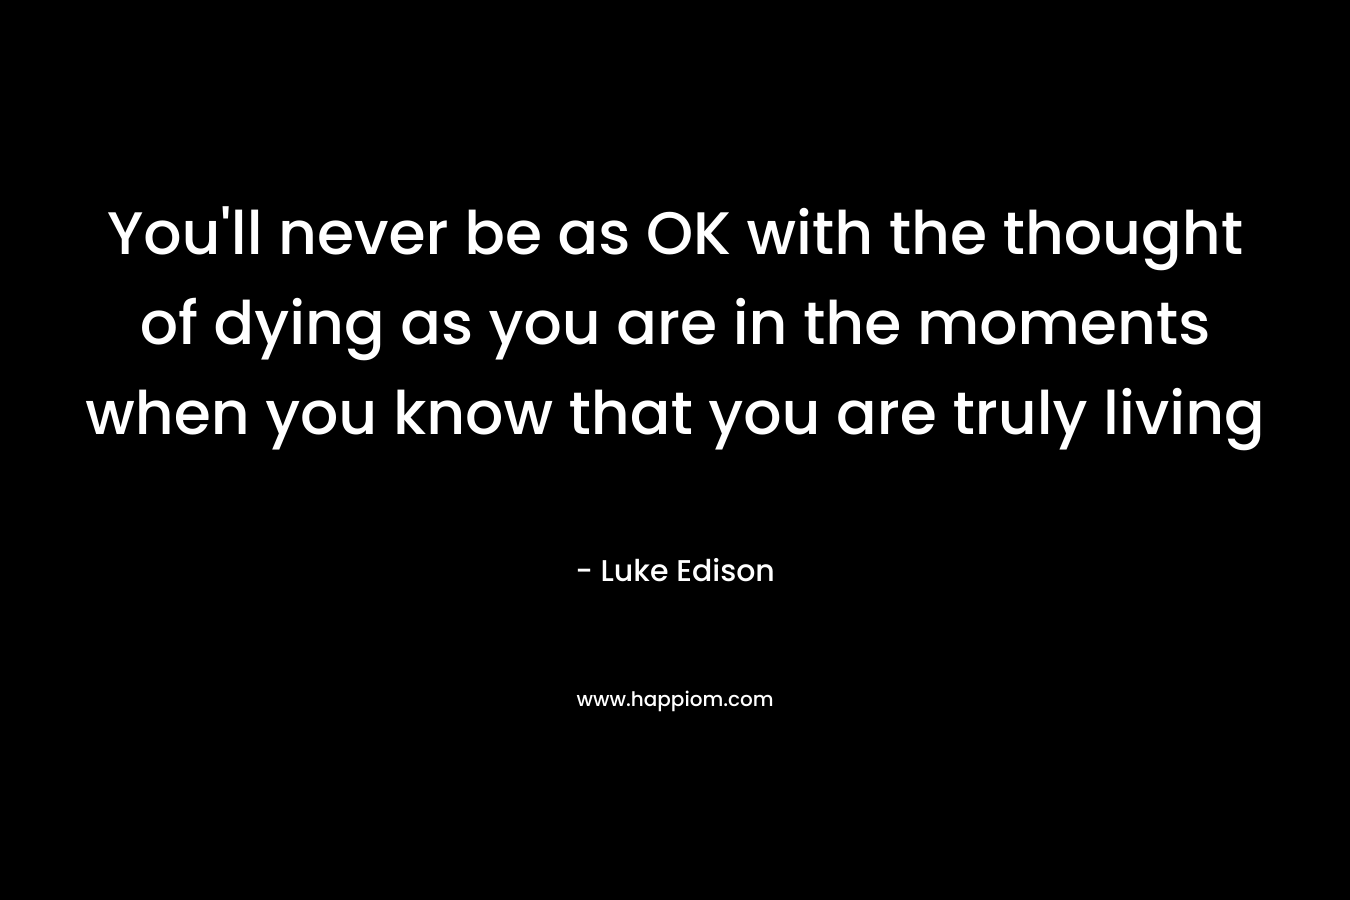 You’ll never be as OK with the thought of dying as you are in the moments when you know that you are truly living – Luke Edison